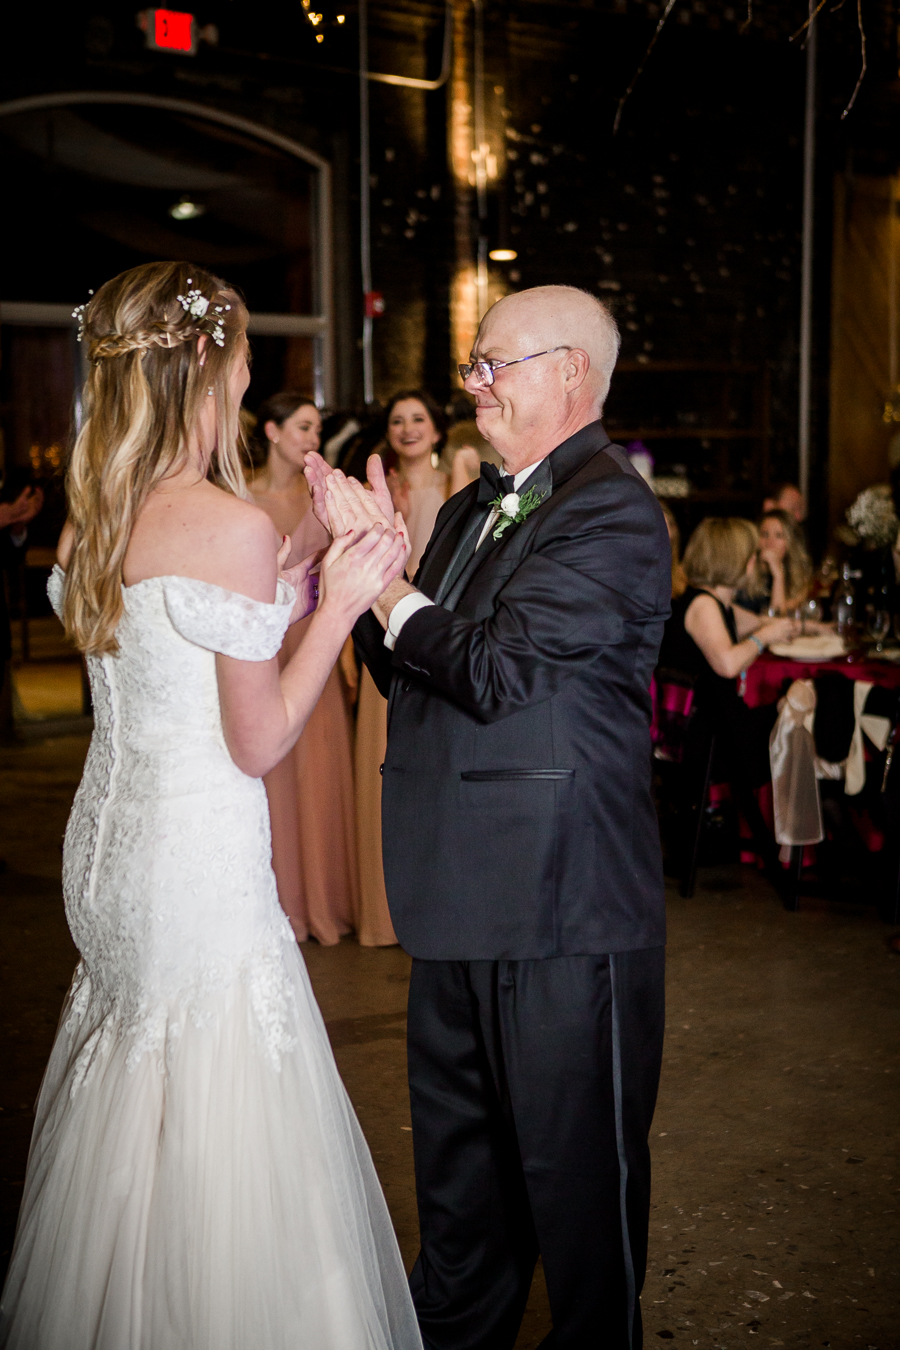 Father of the bride claps for the bride during the reception pictures at this winter wedding at Knoxville Wedding Venue, Jackson Terminal, by Knoxville Wedding Photographer, Amanda May Photos.